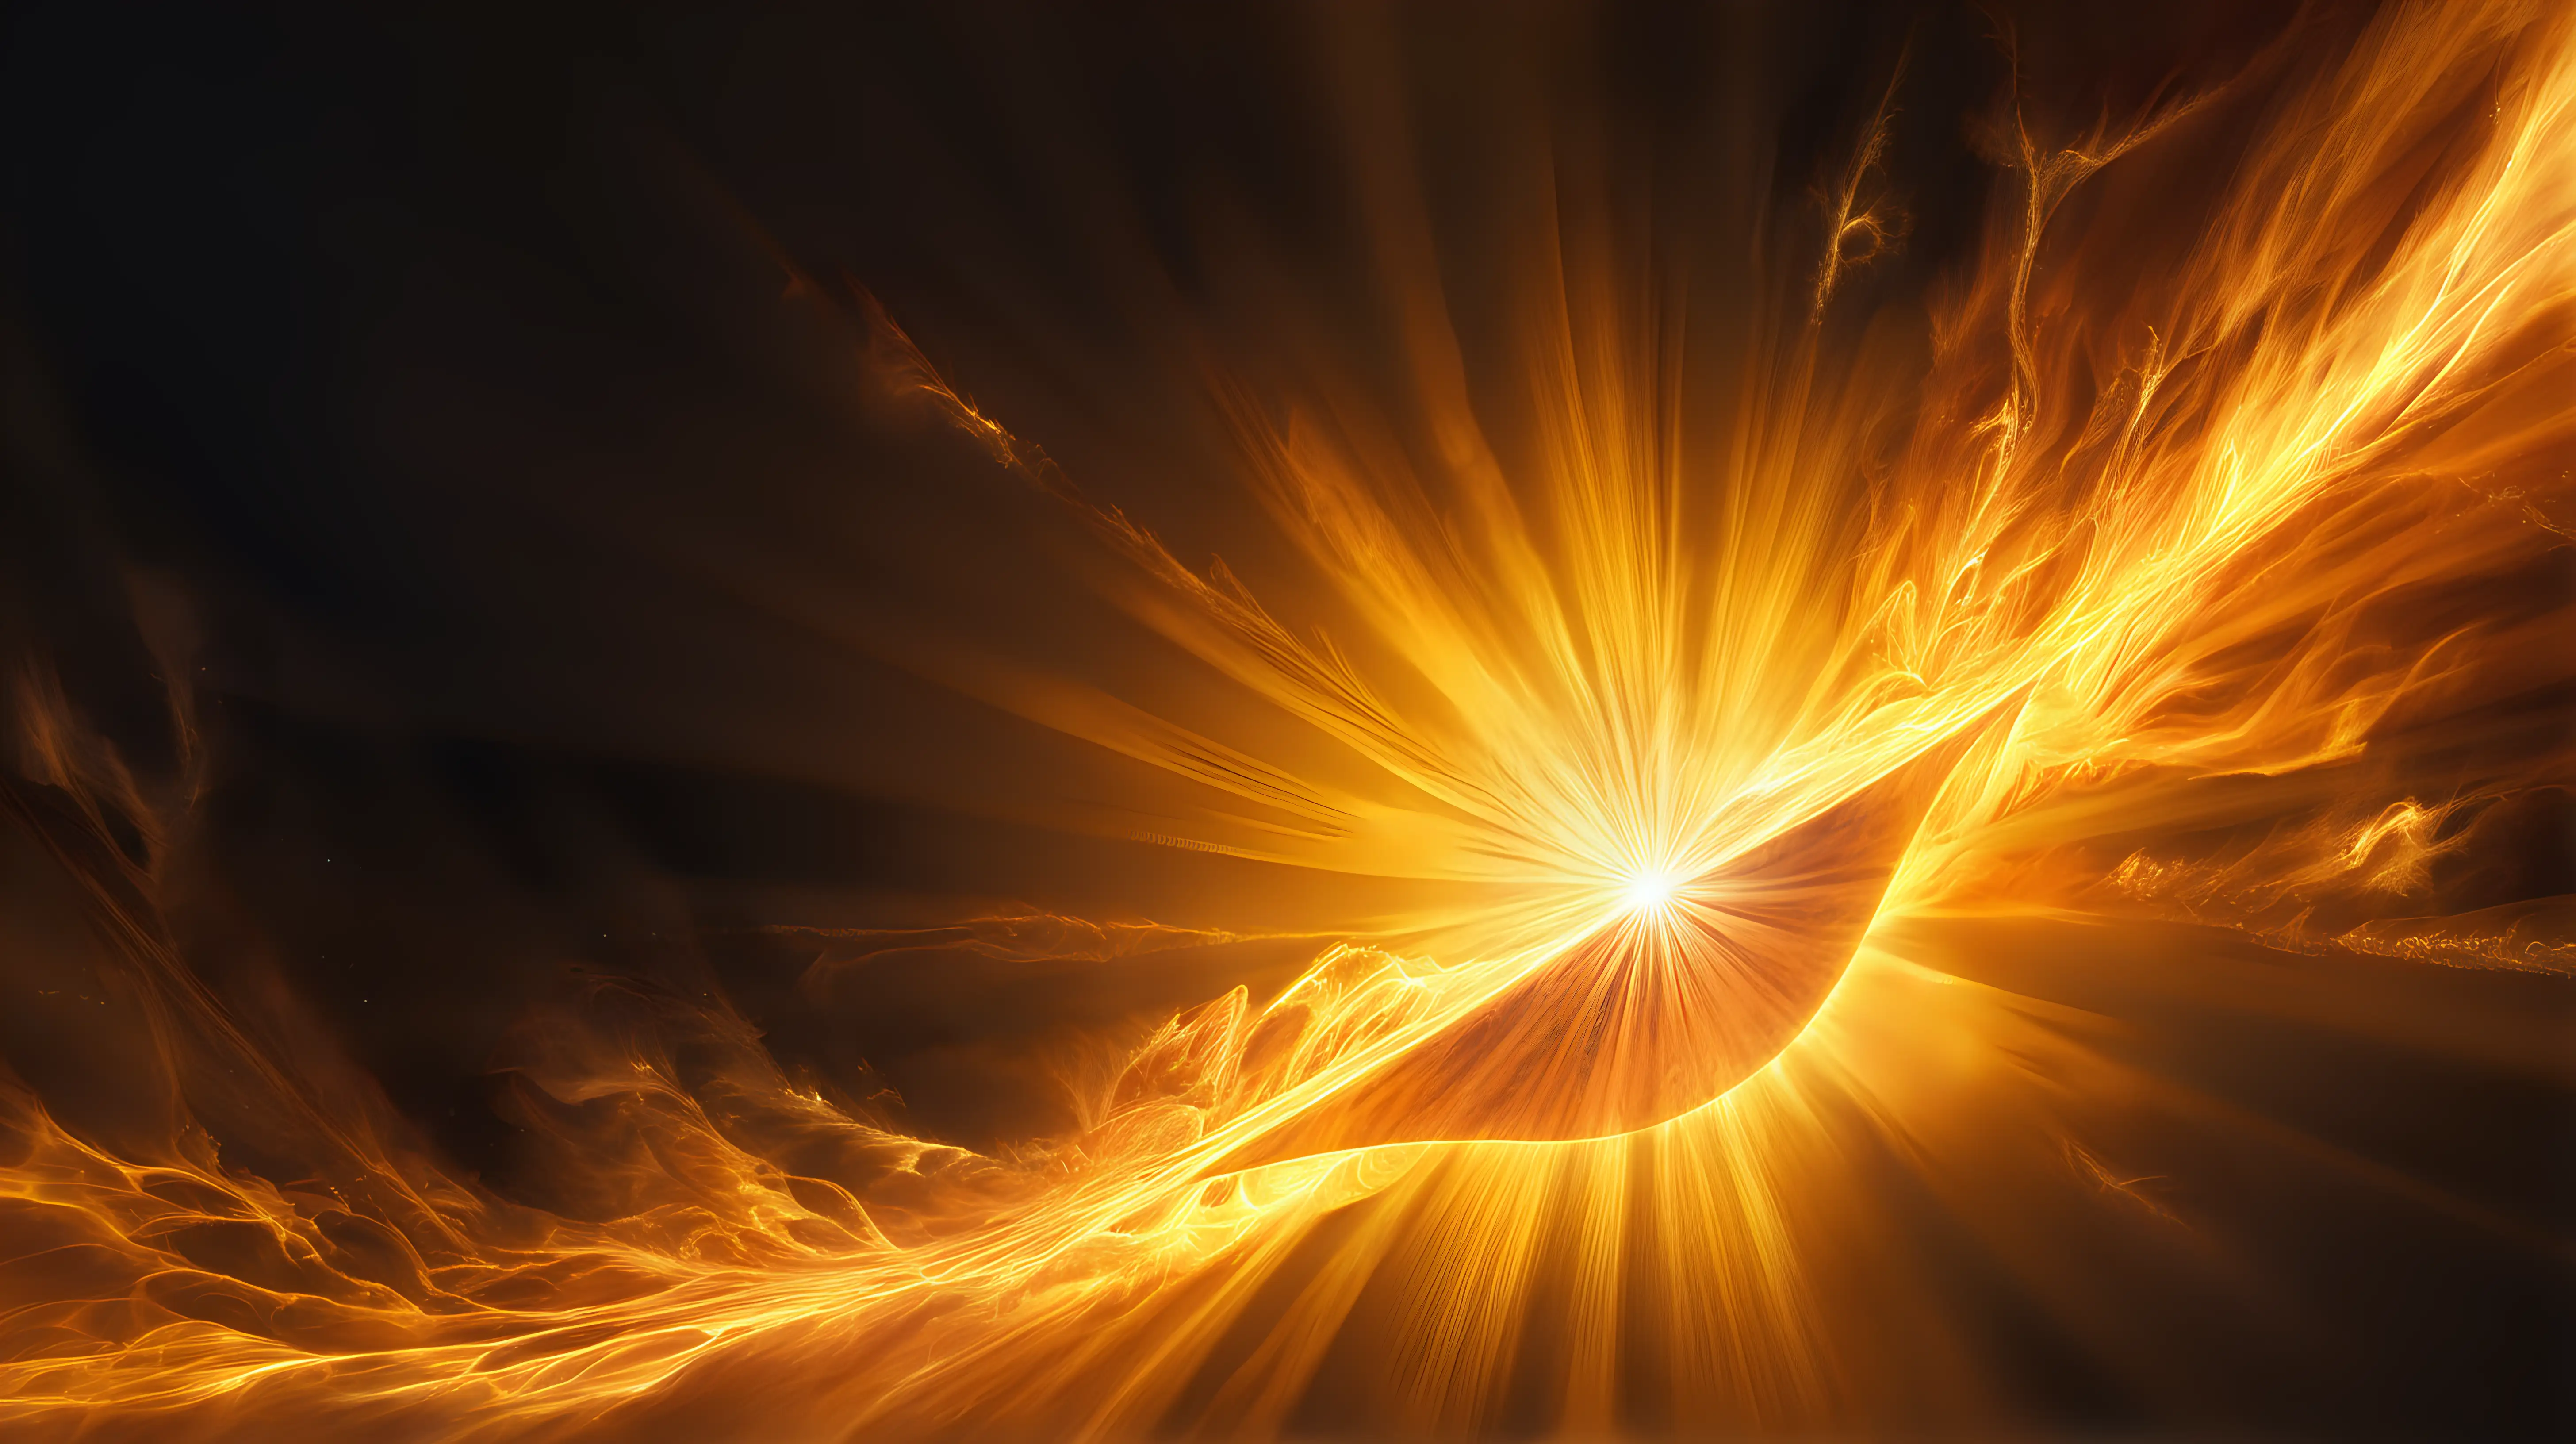 Dynamic Solar Flare Explosion in Warm Yellows and Oranges